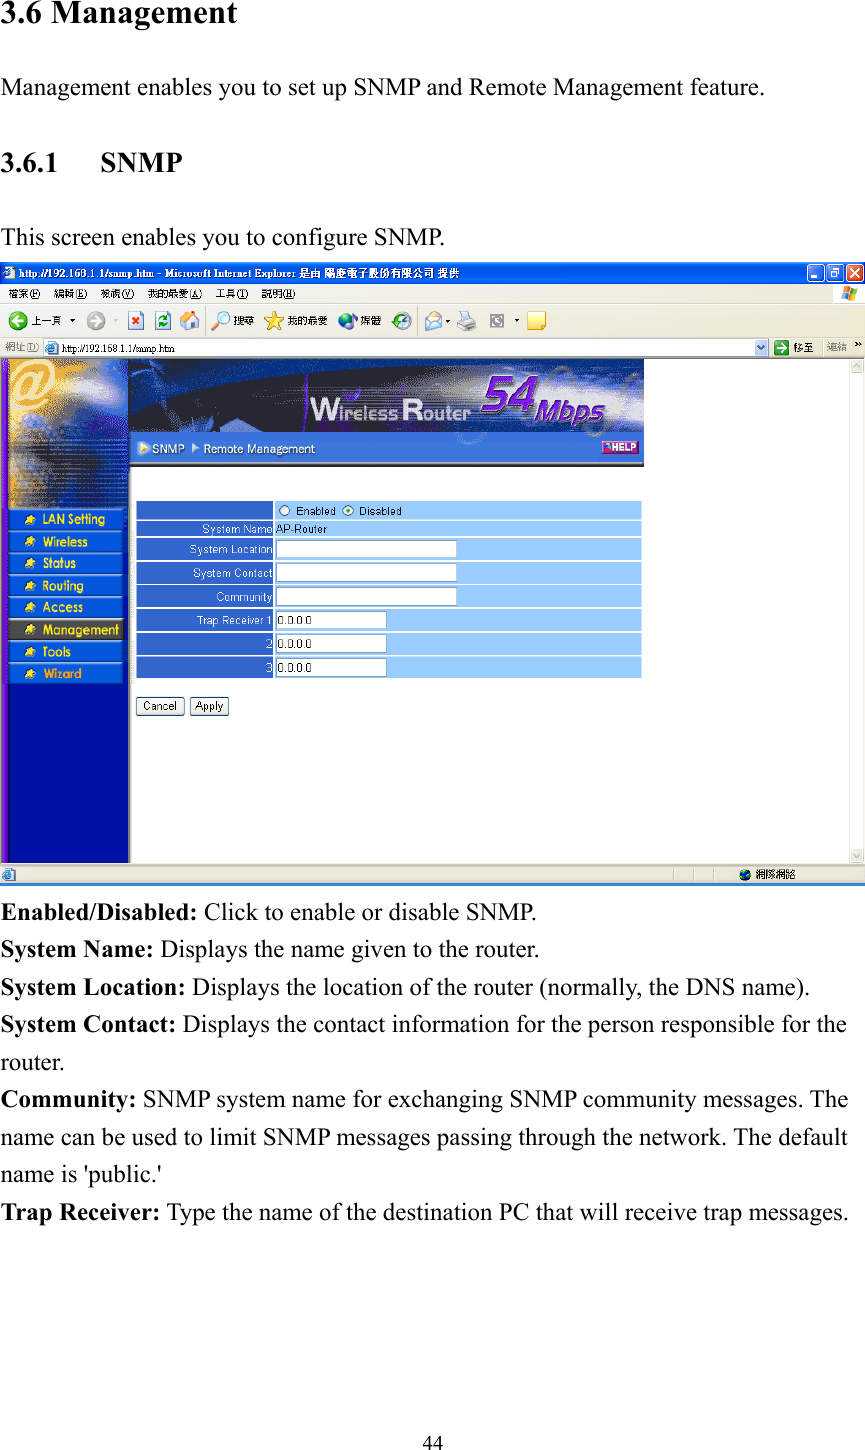 3.6 Management Management enables you to set up SNMP and Remote Management feature. 3.6.1 SNMP This screen enables you to configure SNMP.  Enabled/Disabled: Click to enable or disable SNMP. System Name: Displays the name given to the router. System Location: Displays the location of the router (normally, the DNS name). System Contact: Displays the contact information for the person responsible for the router. Community: SNMP system name for exchanging SNMP community messages. The name can be used to limit SNMP messages passing through the network. The default name is &apos;public.&apos; Trap Receiver: Type the name of the destination PC that will receive trap messages.   44